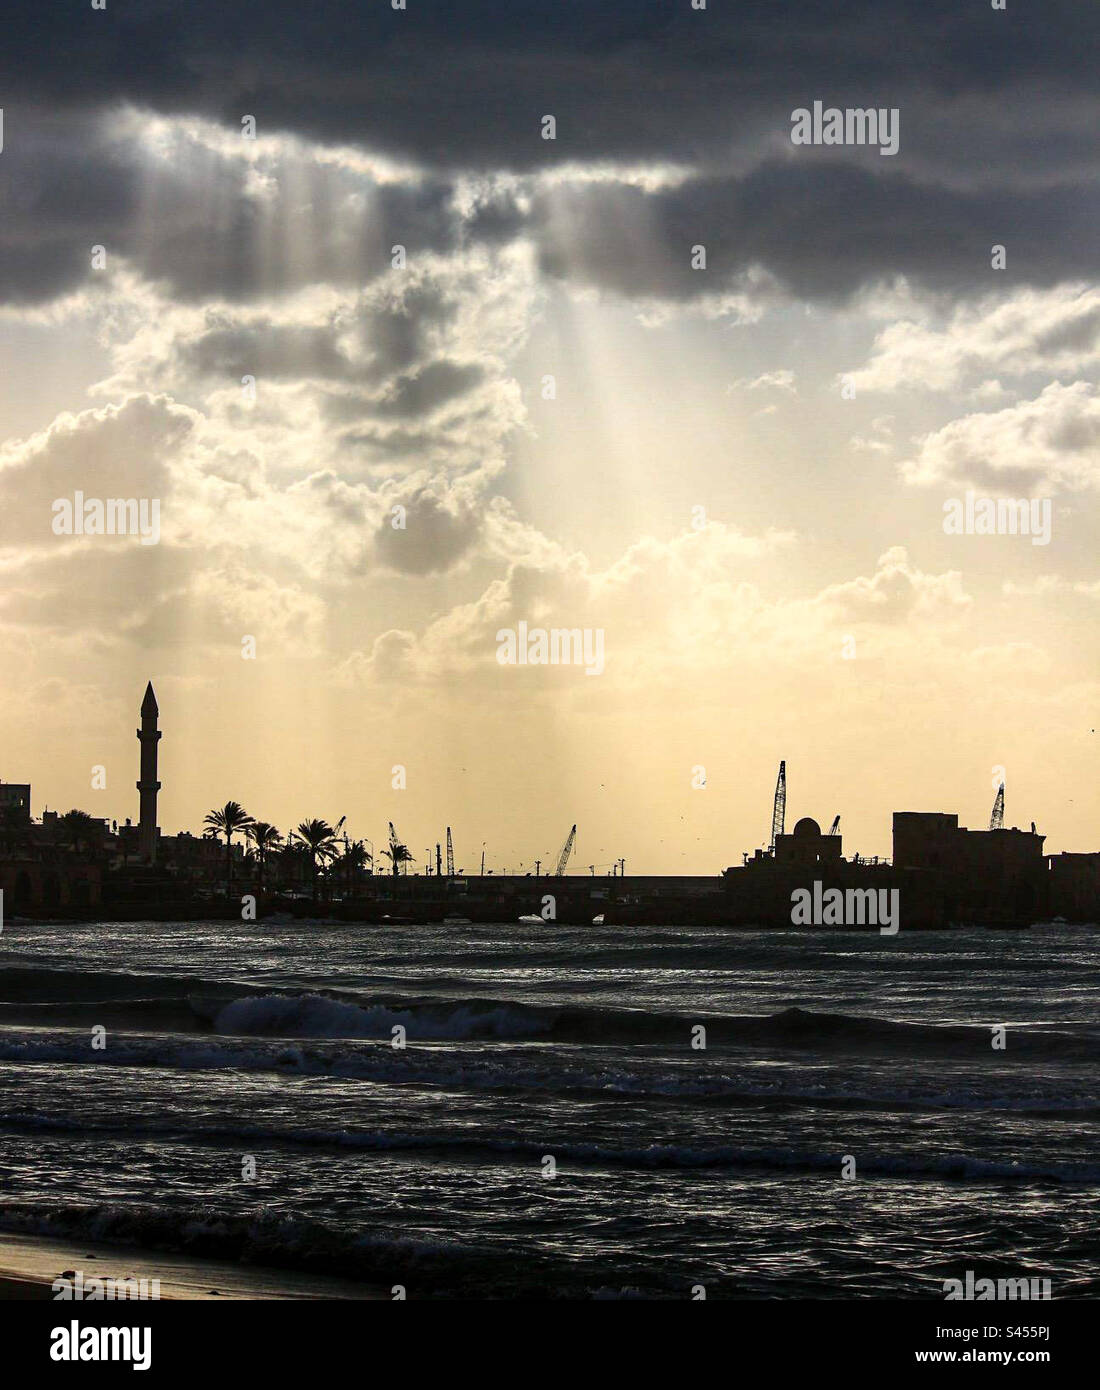 Crepuscular rays pass through a thick blanket of clouds to silhouette the port of Sidon in Lebanon and adjacent mosque. In the foreground are soft rolling waves. Stock Photo